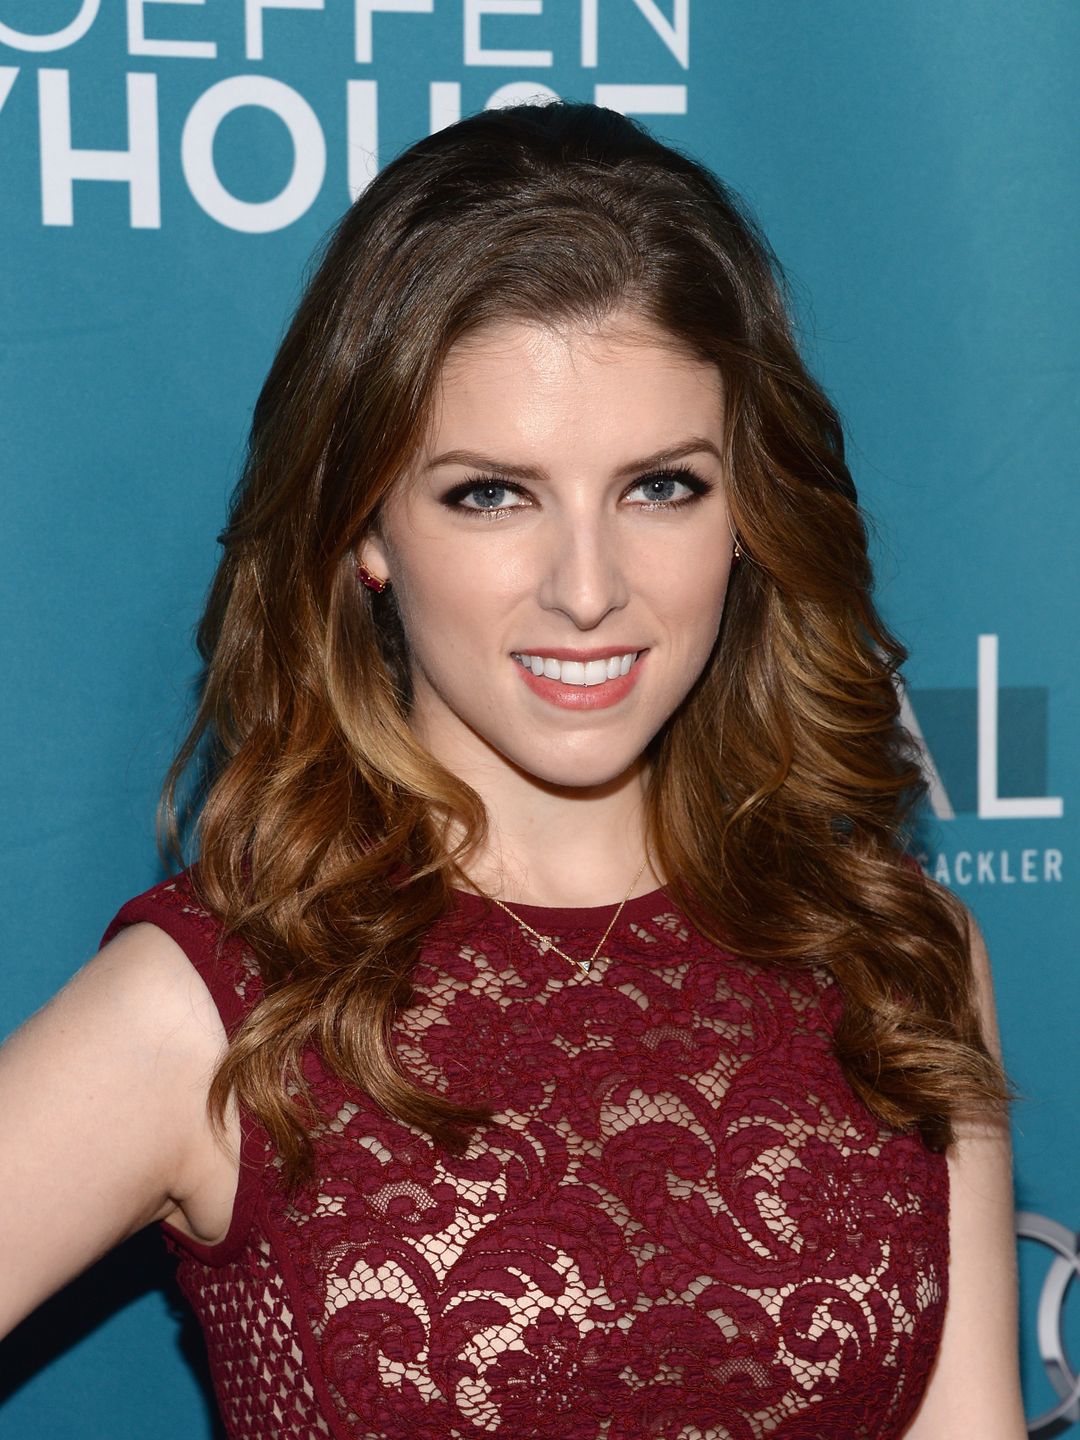 Anna Kendrick height and weight